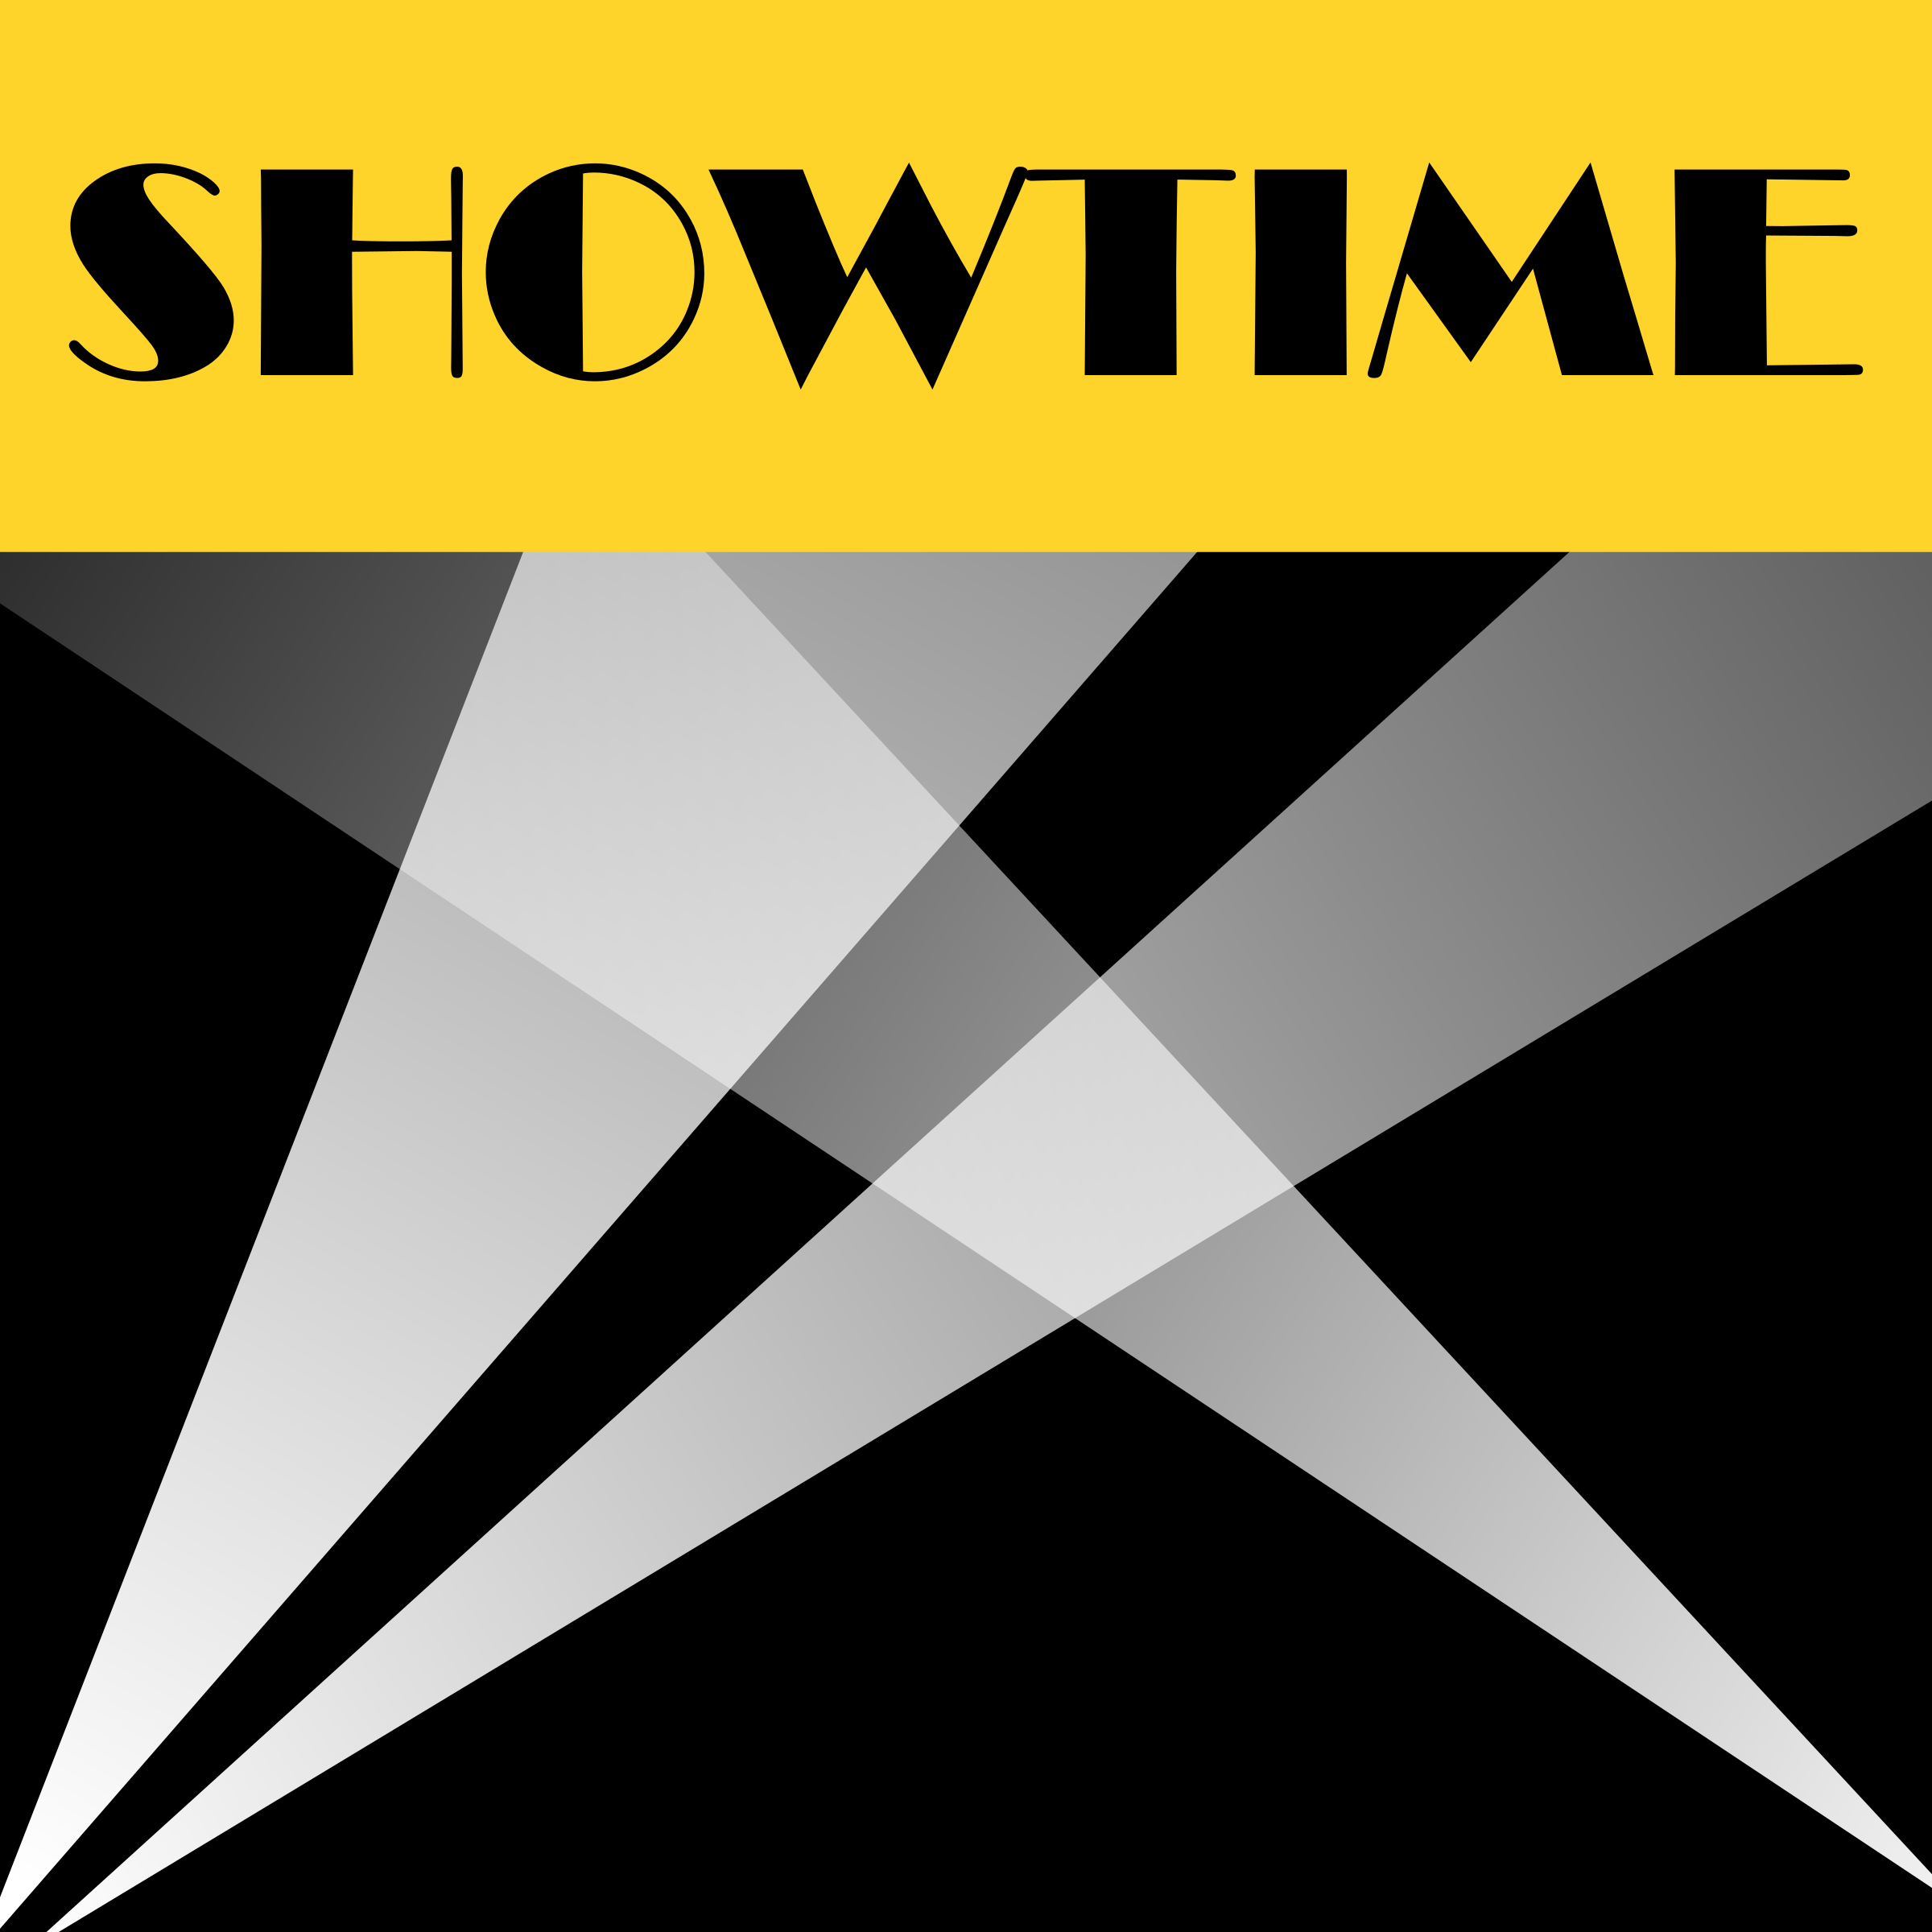 Showtime anytime Icons - Download 6 Free Showtime anytime icons here